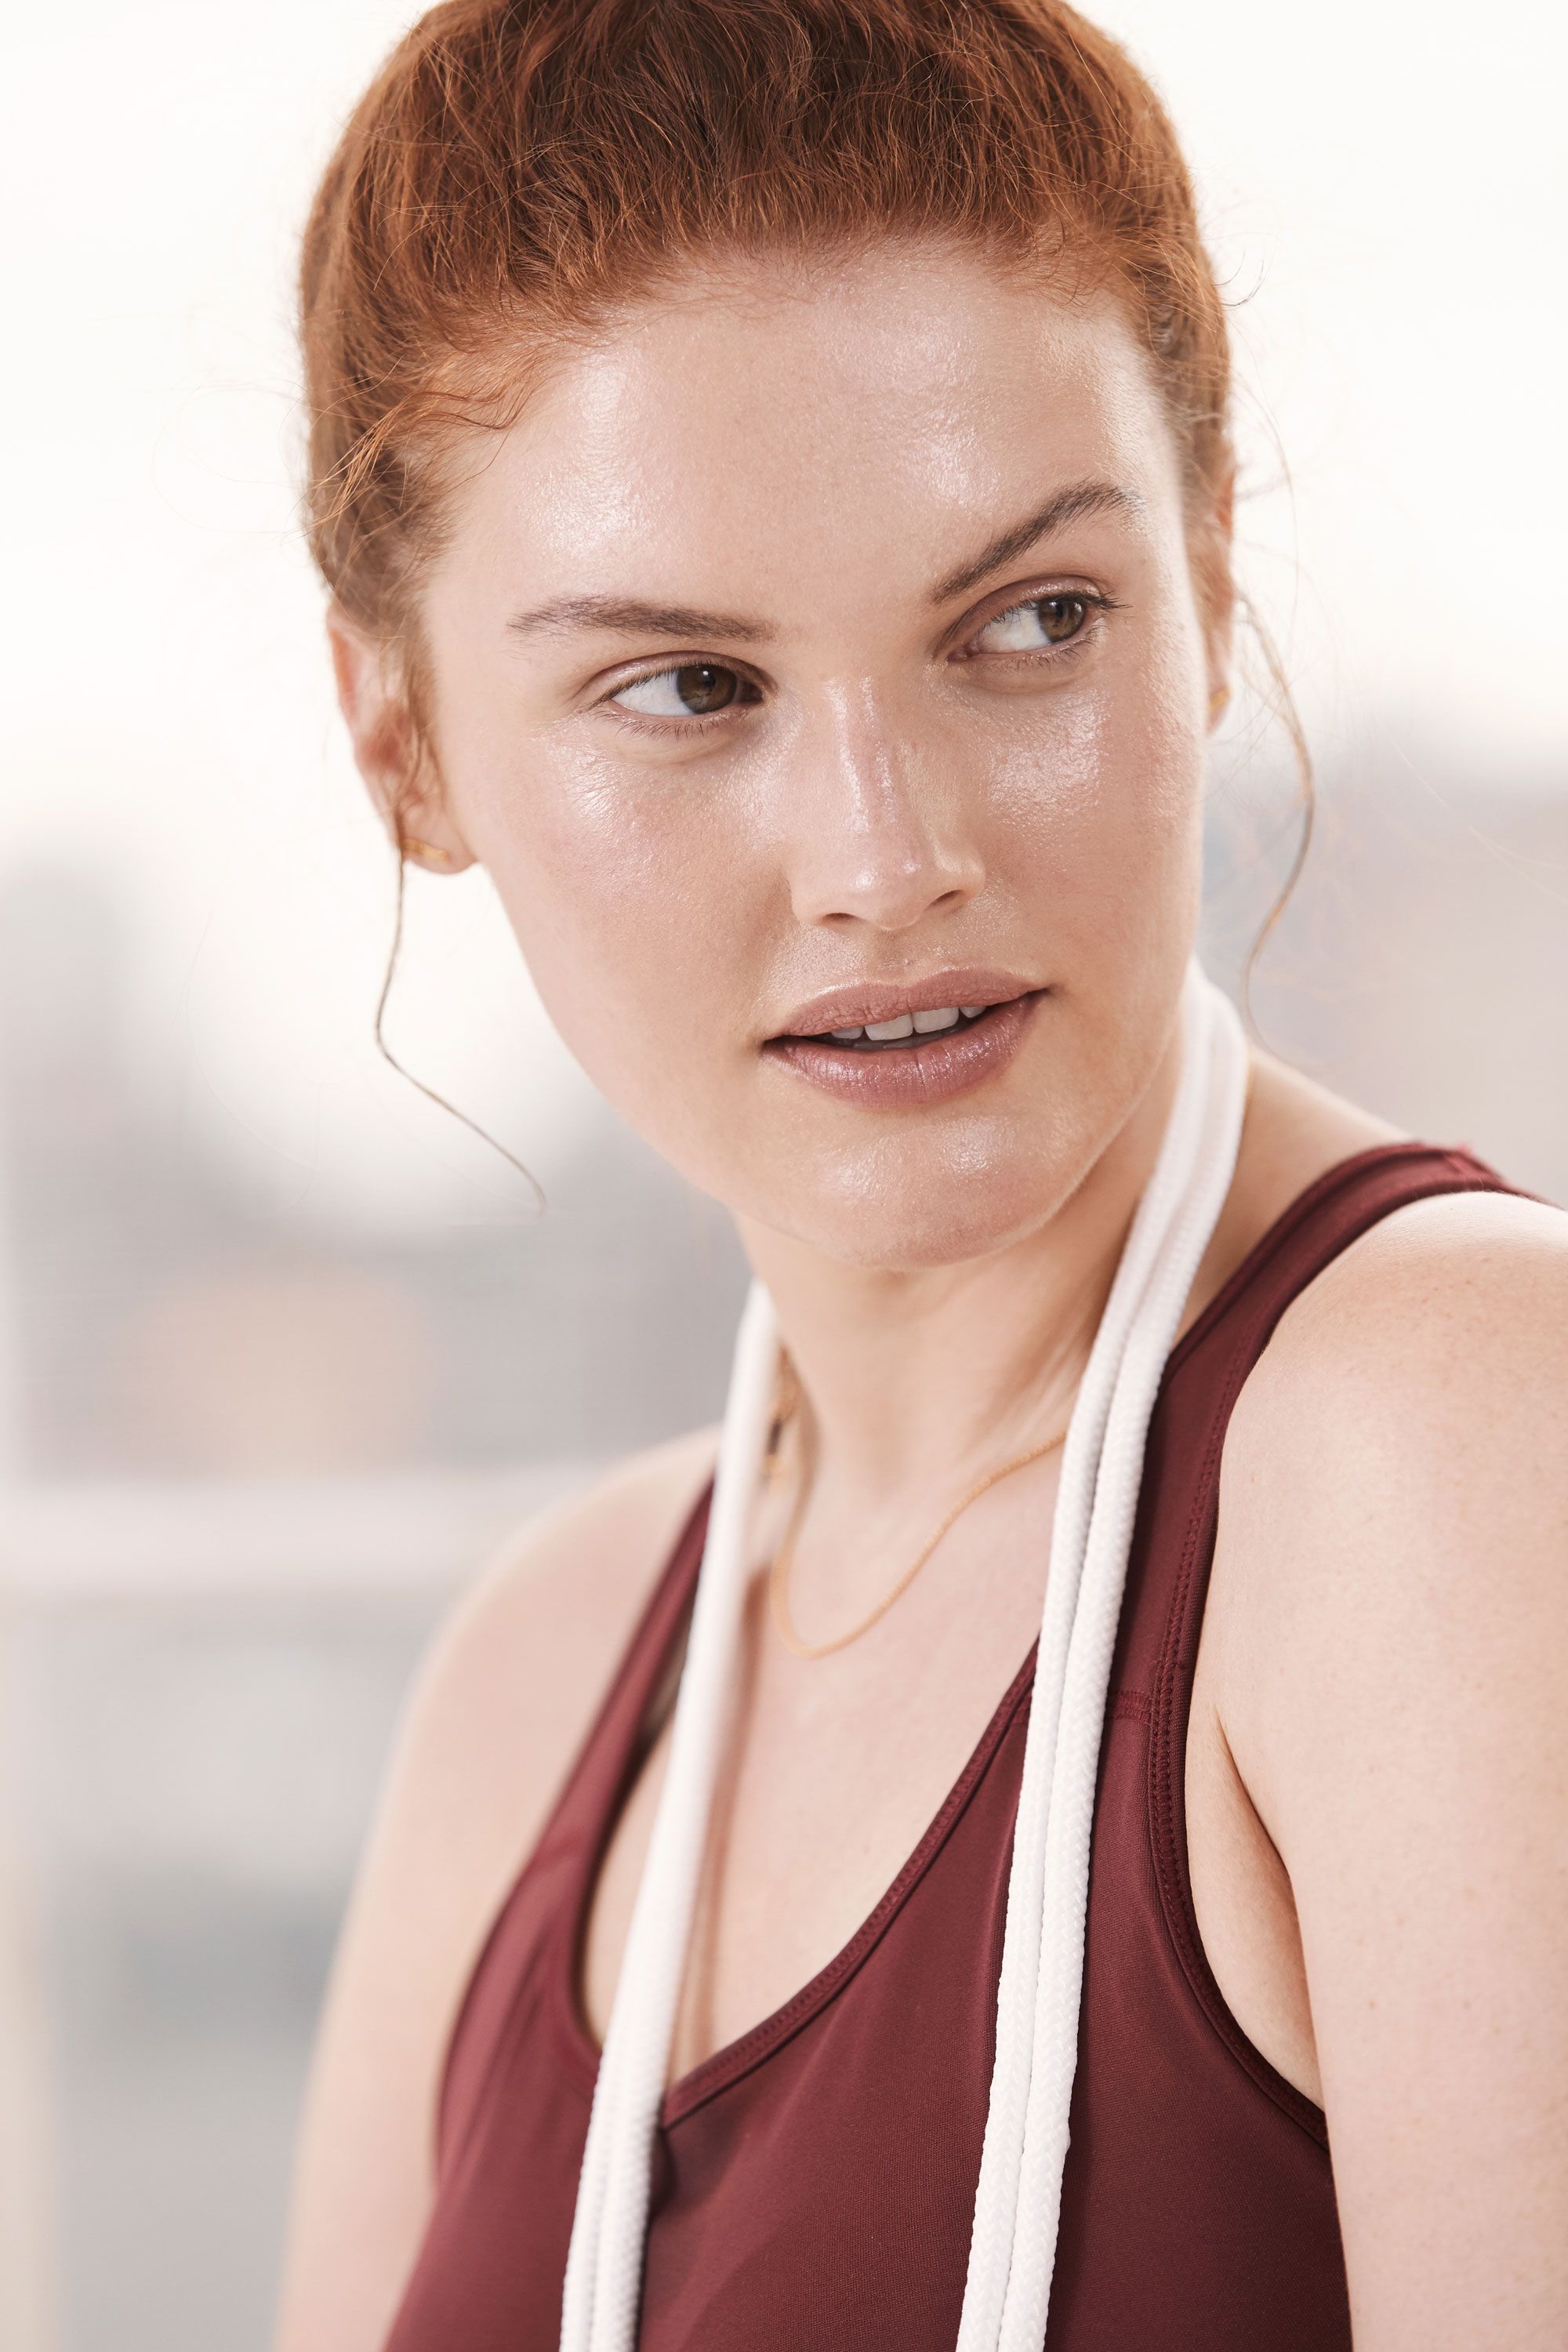 Is It Really That Bad to Work Out In Makeup?